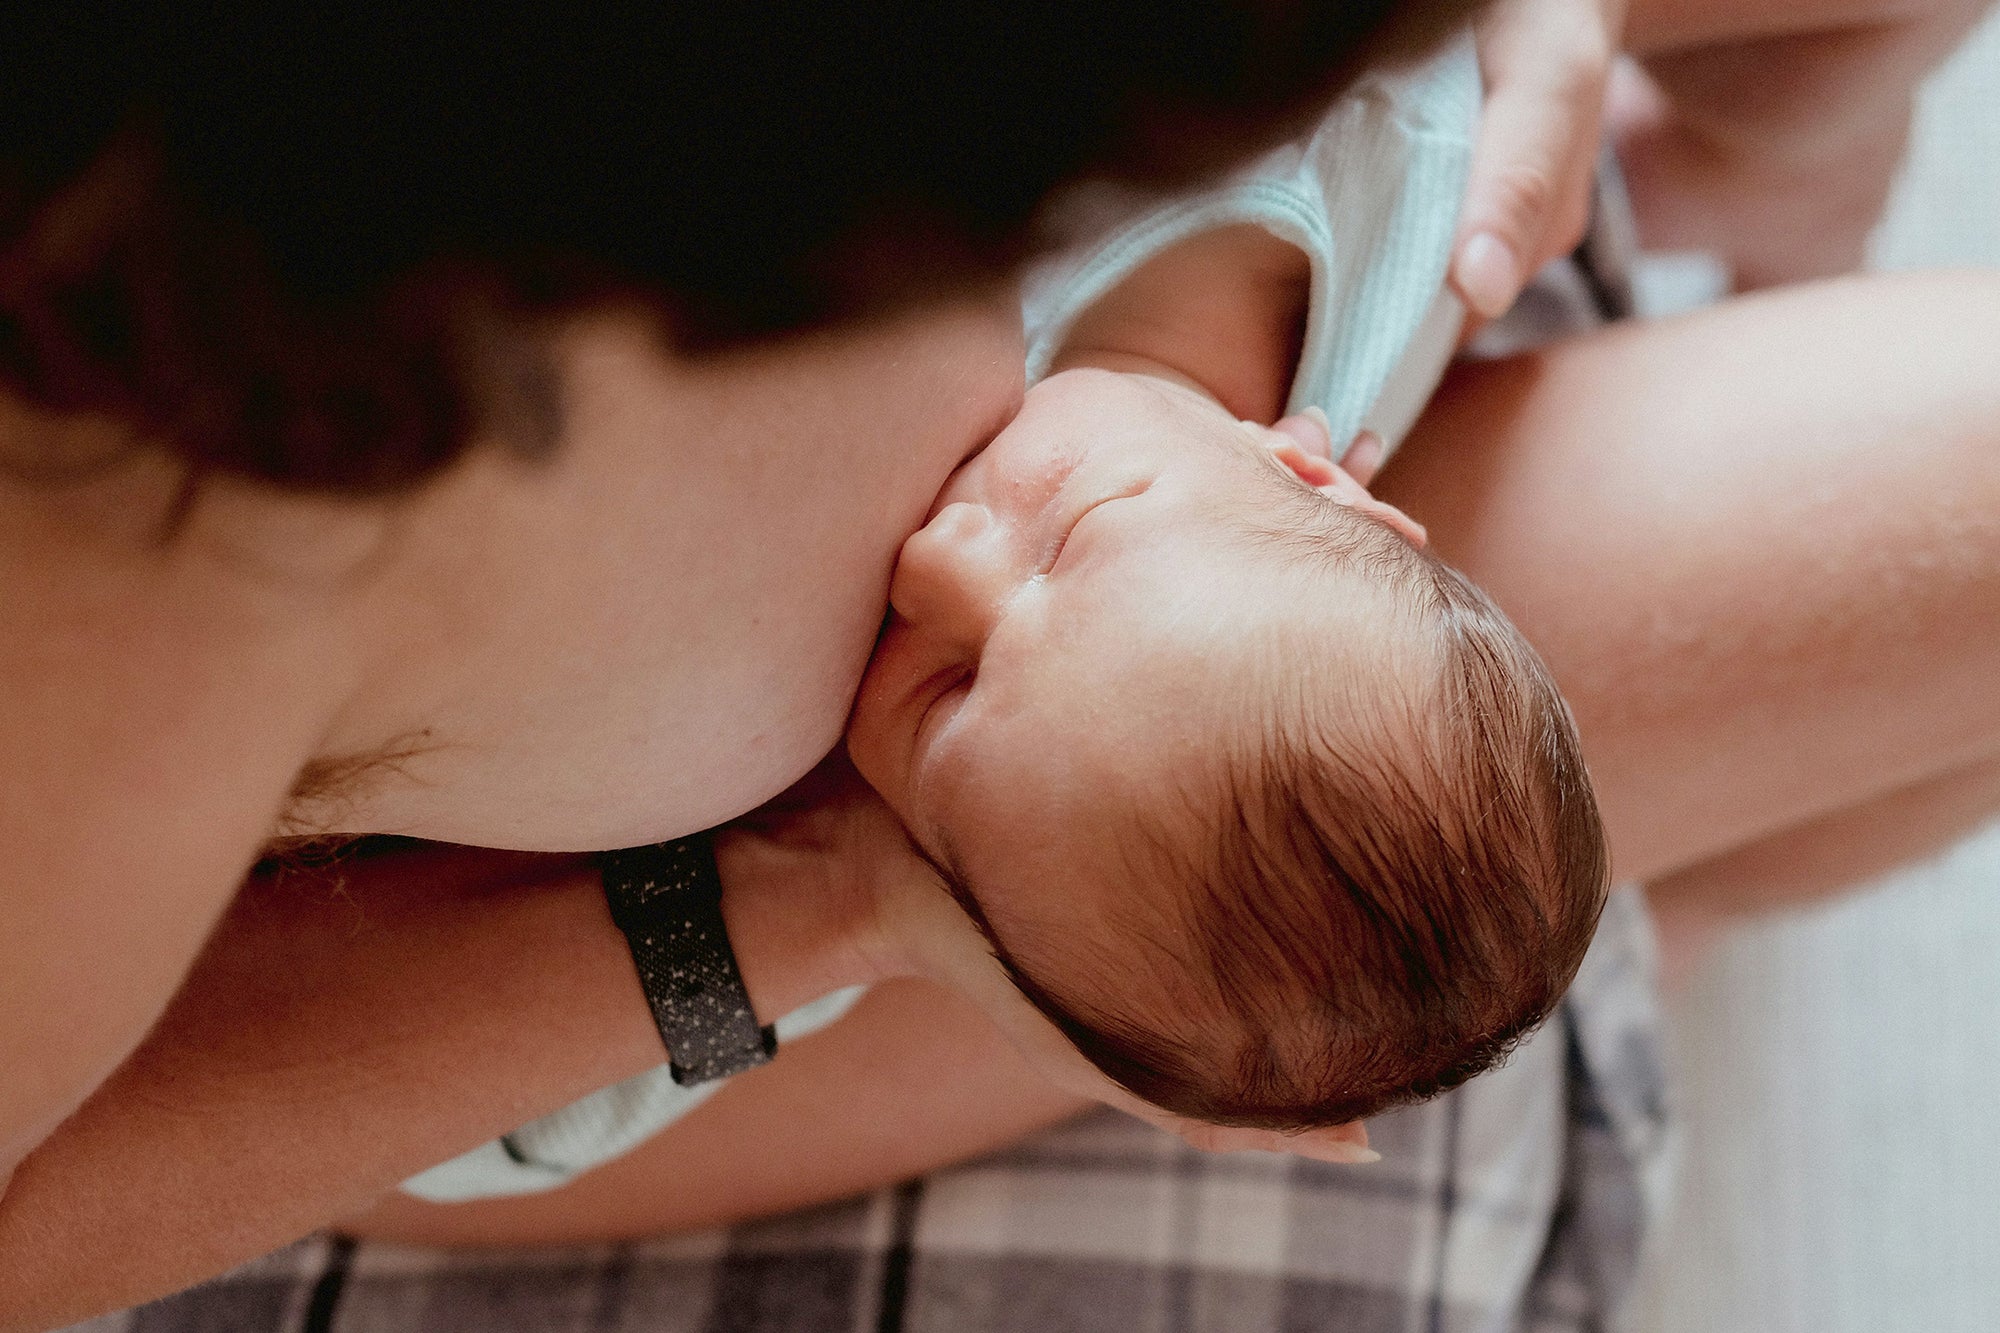 The 7 Things About Breastfeeding You Probably Didn't Know